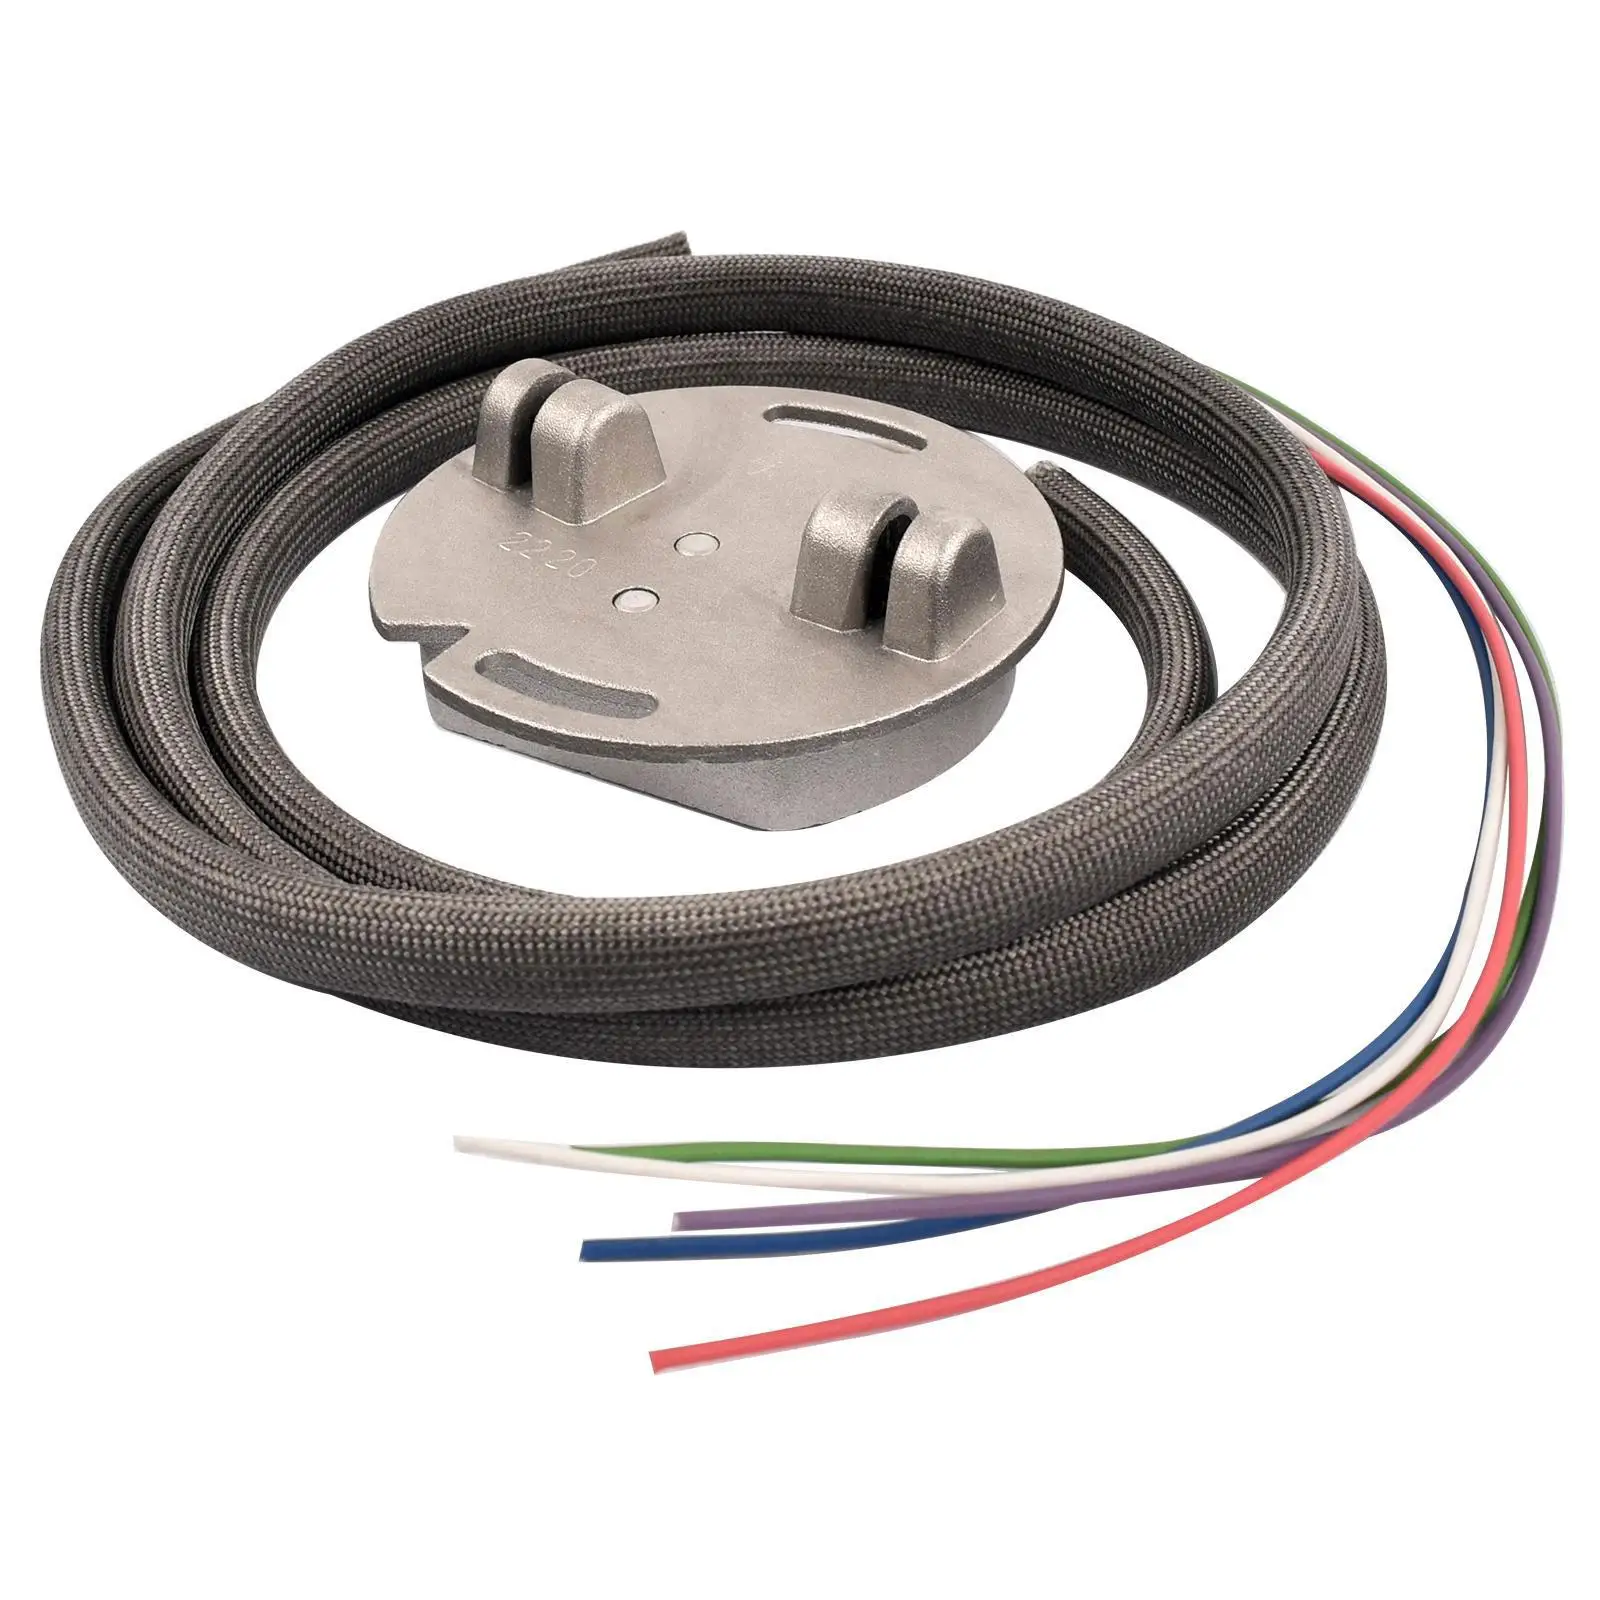 Electronic Ignition Module 53-644 for Harley-Davidson Accessories